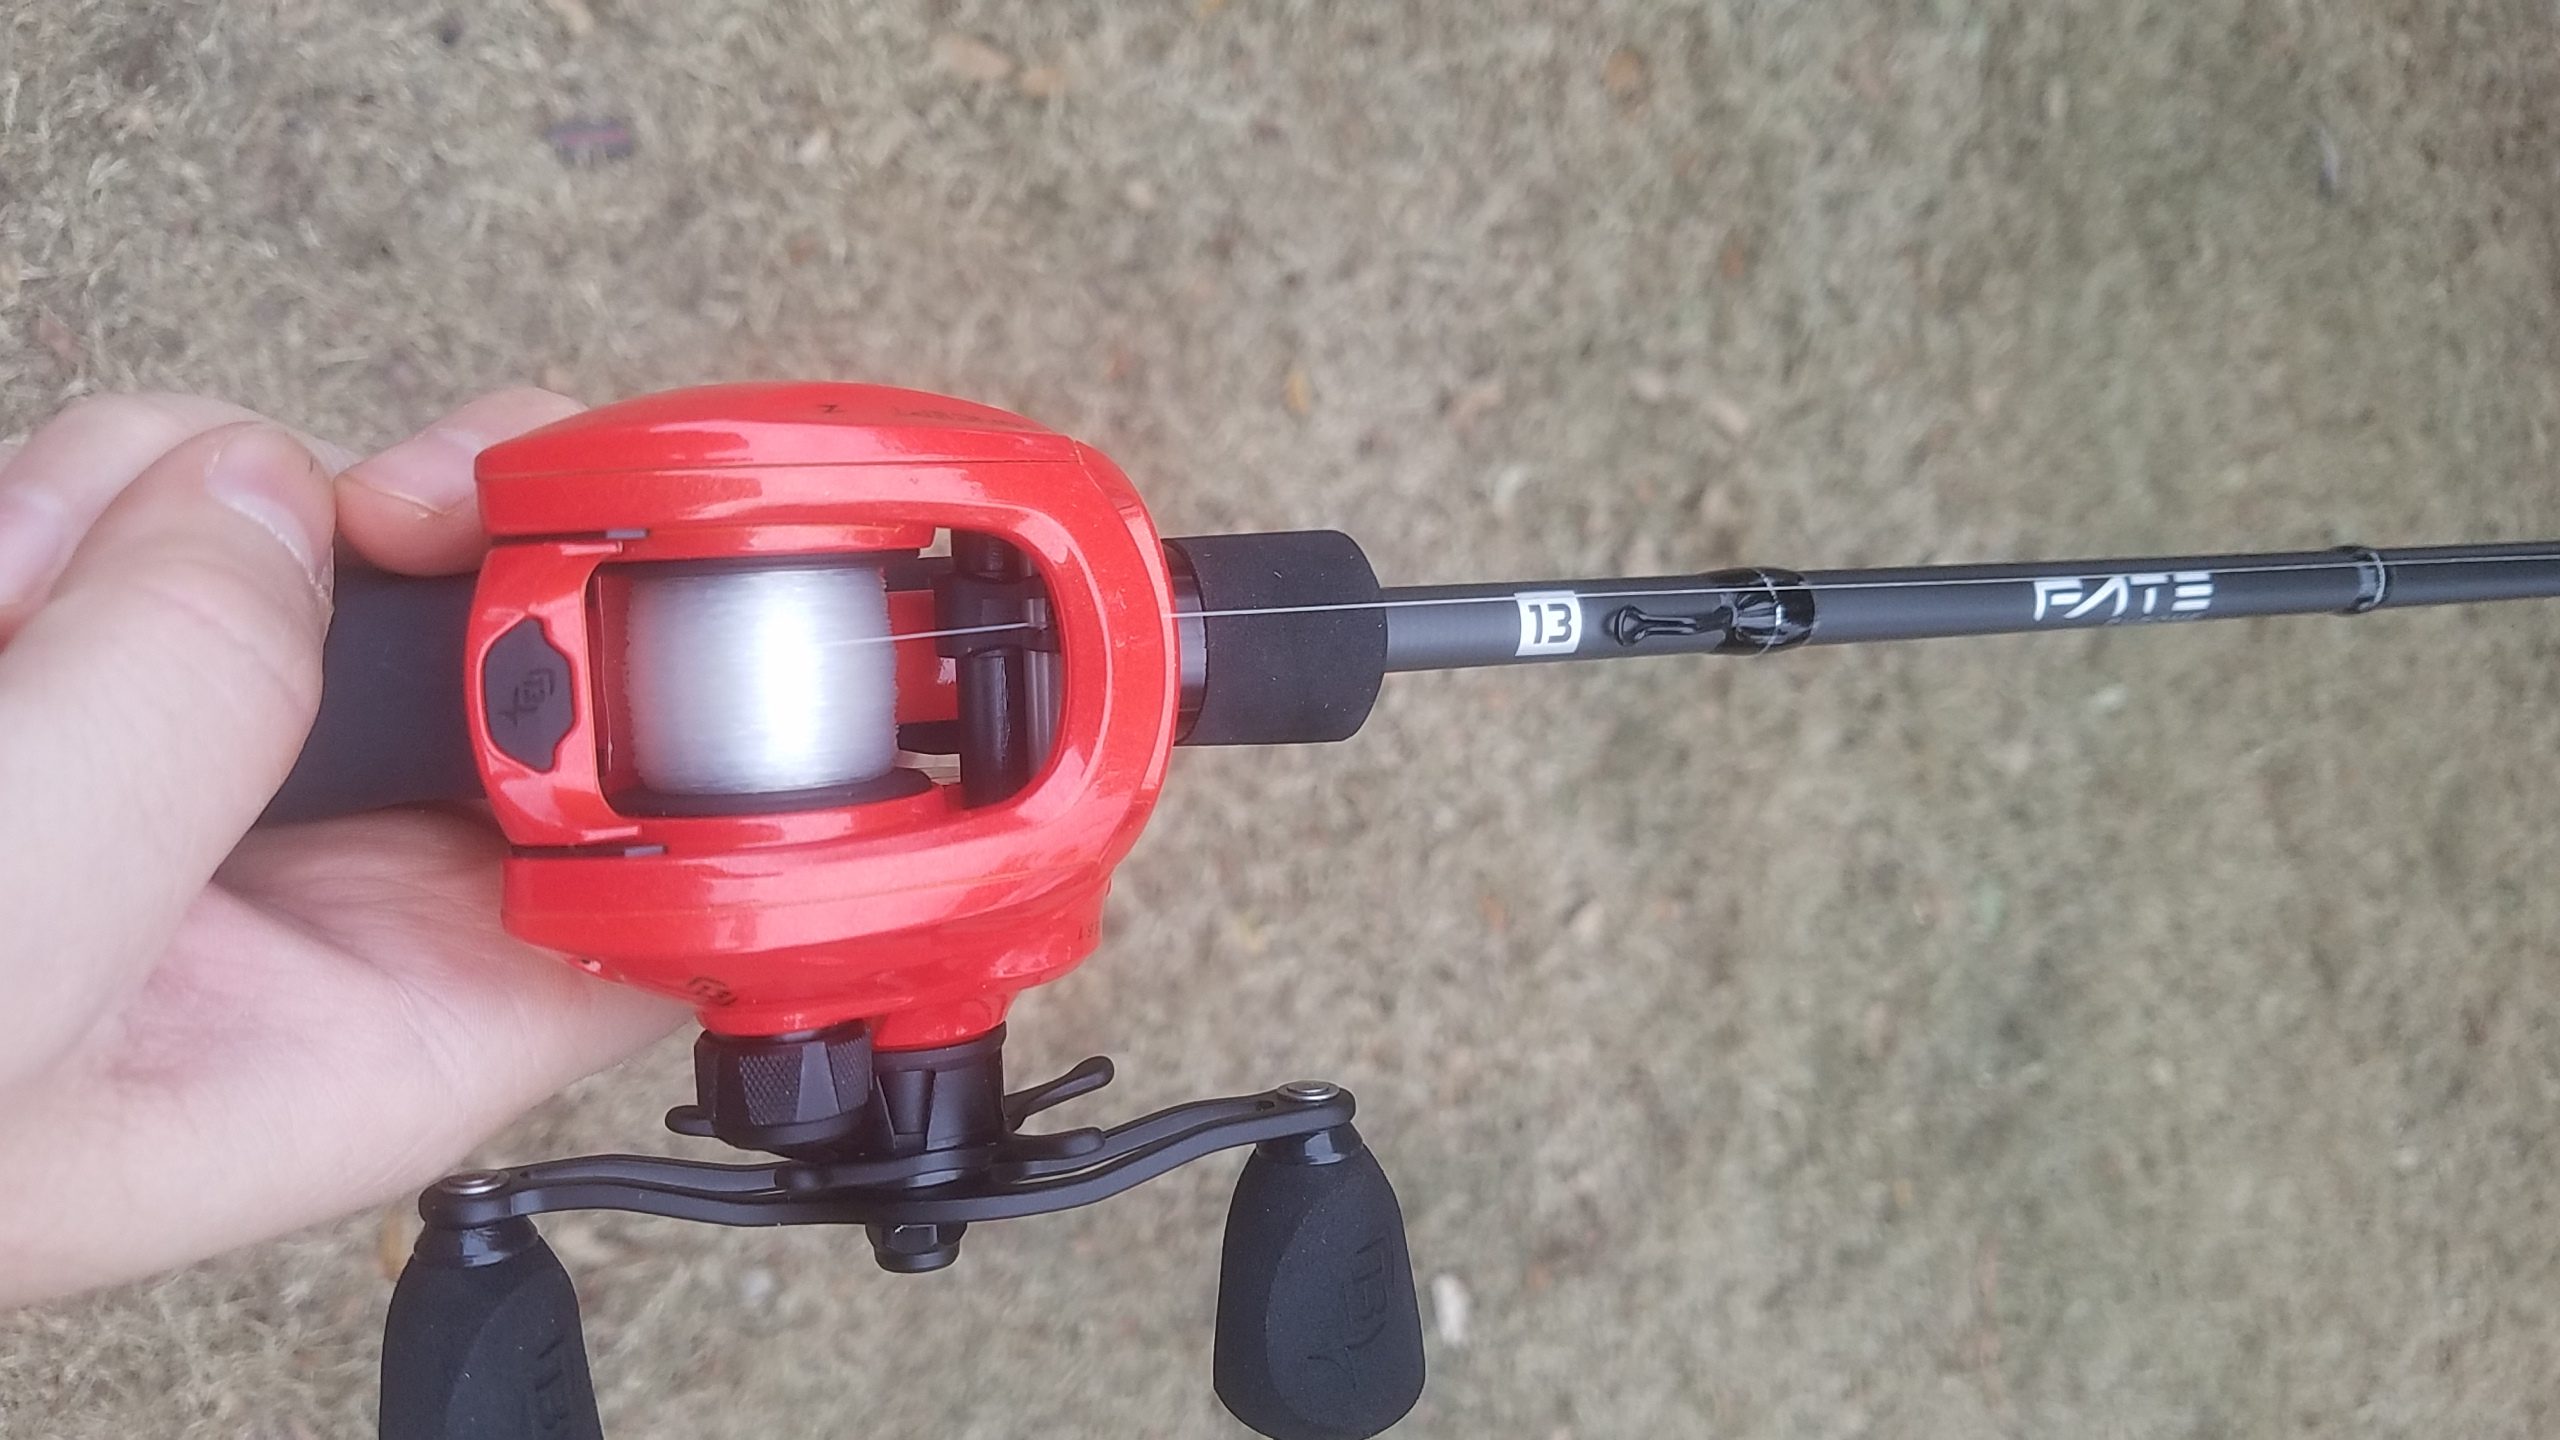 REVIEW: 13 Fishing Concept Z Baitcasting Reel - Payne Outdoors